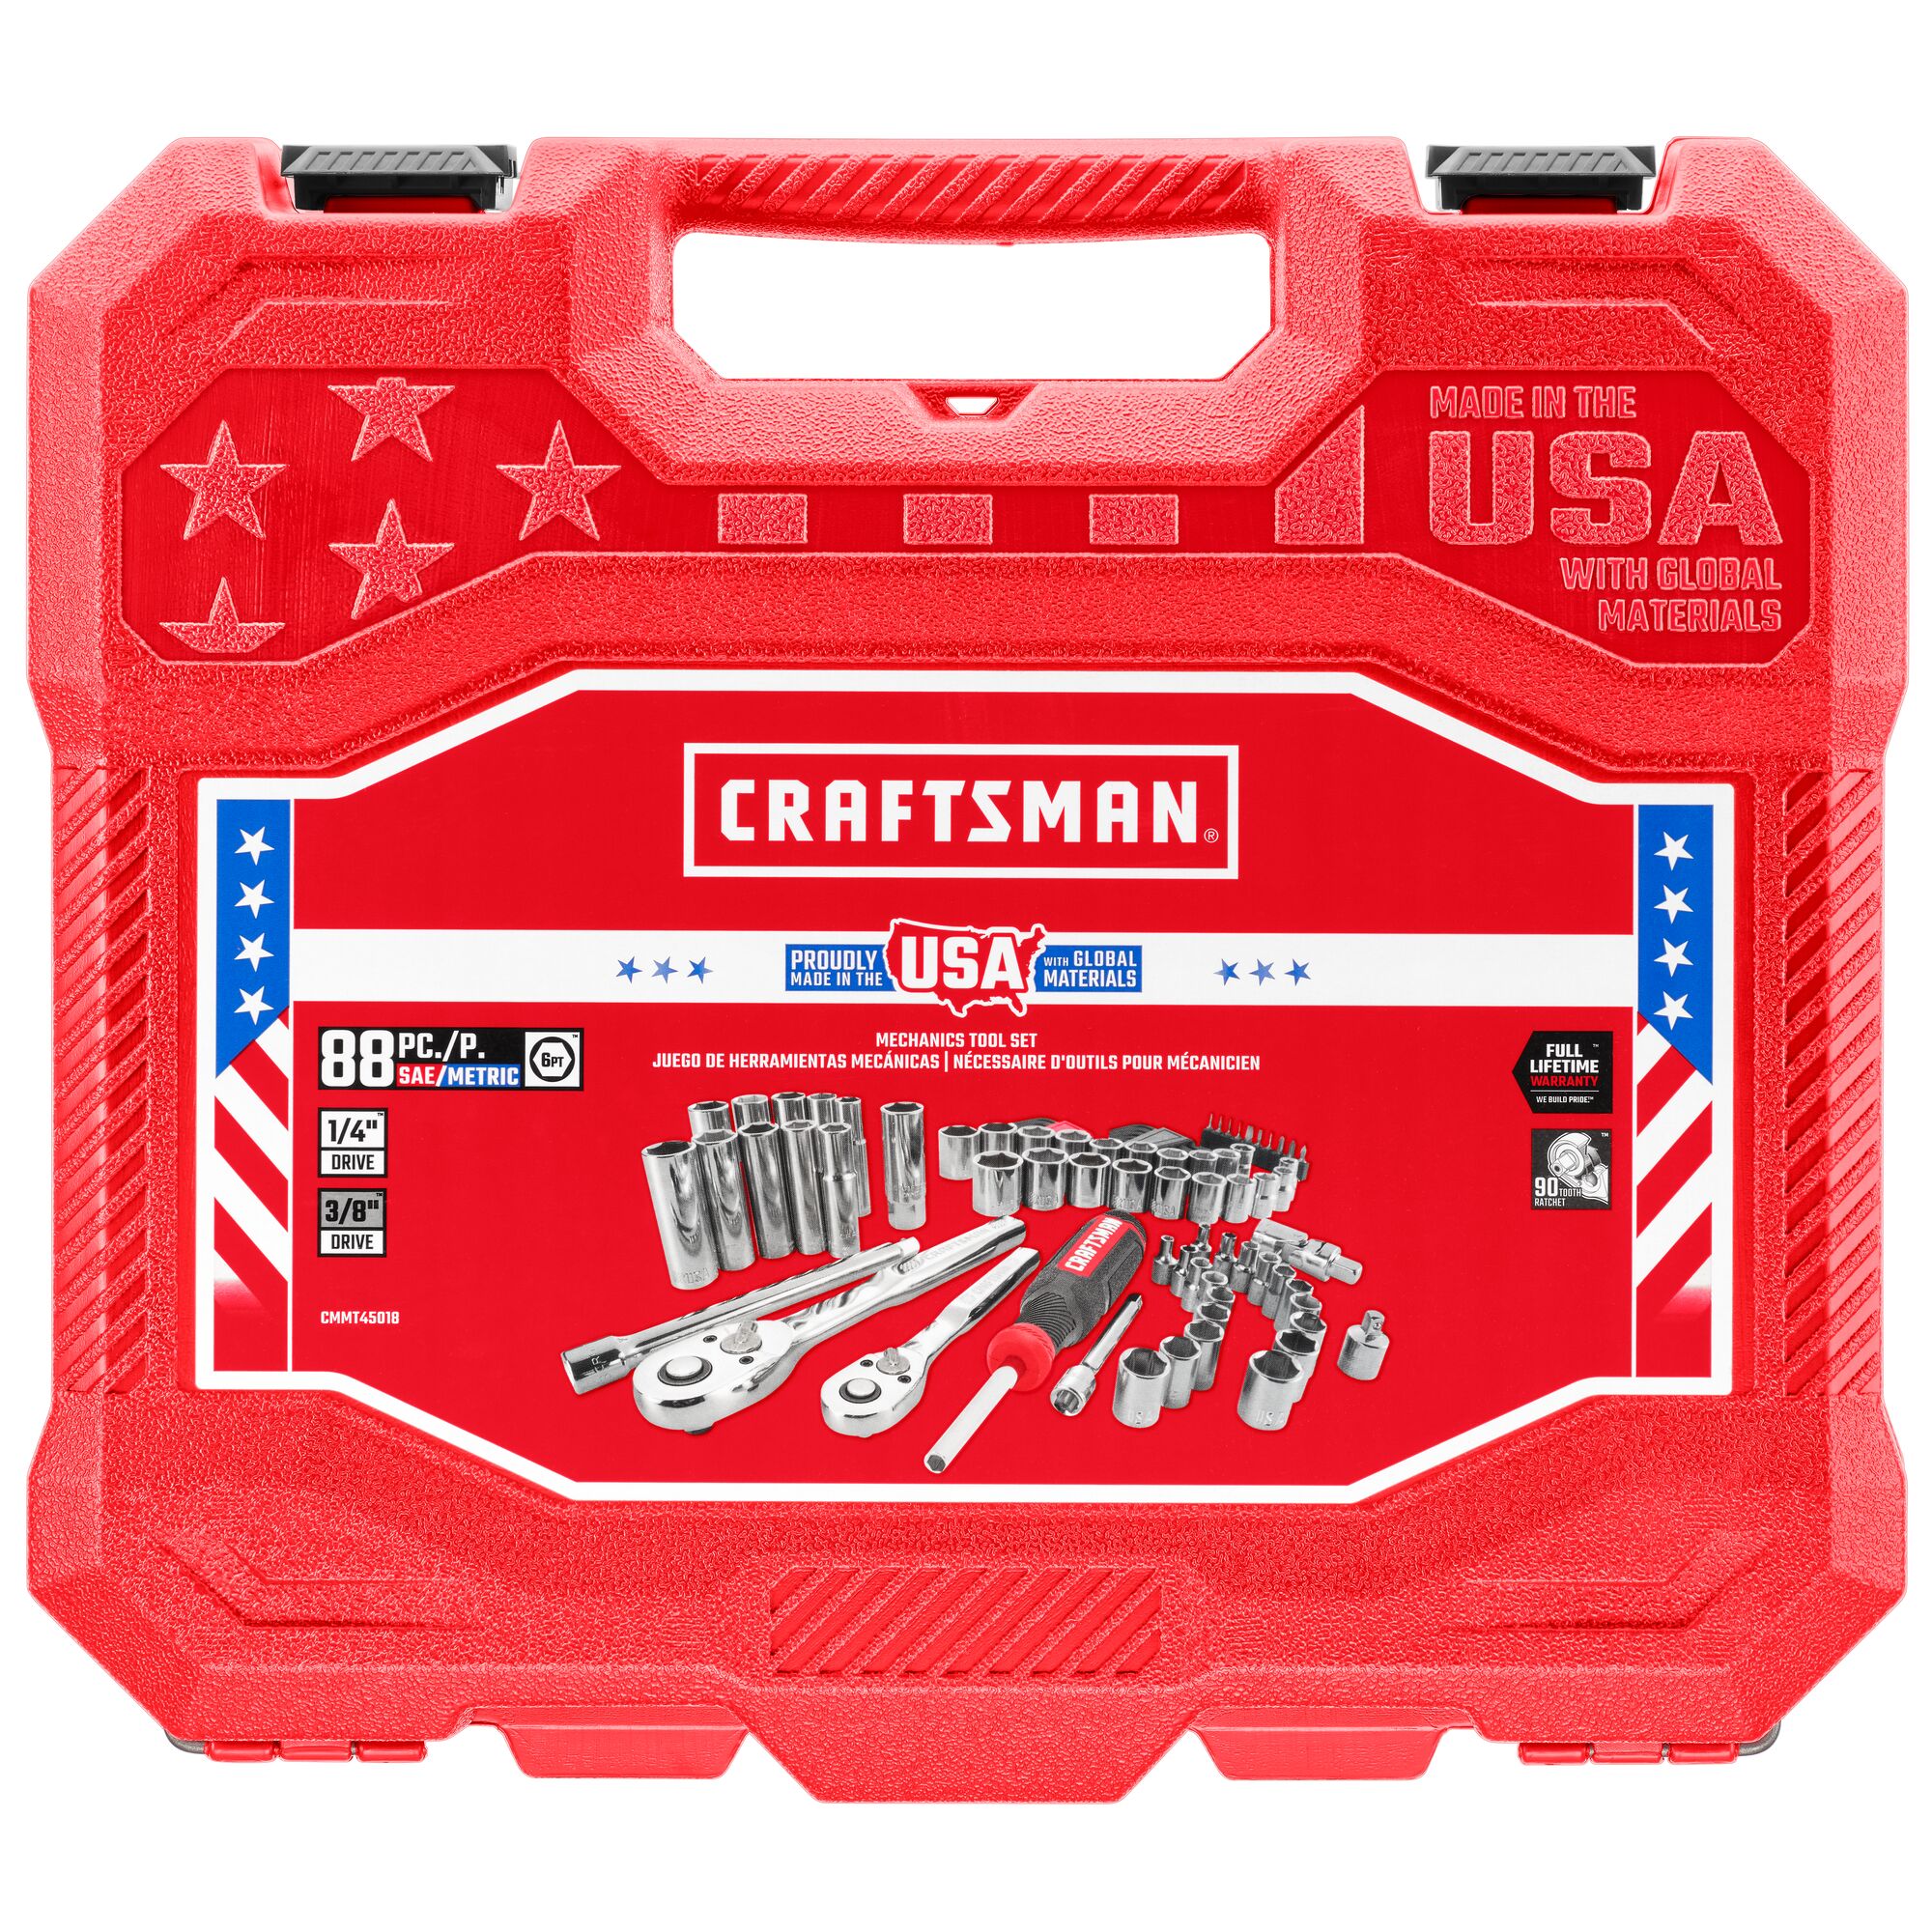 CRAFTSMAN 88-Piece Standard (SAE) and Tool Sets Tool department Polished Set with Mechanics Mechanics at Chrome Hard Metric in the Case